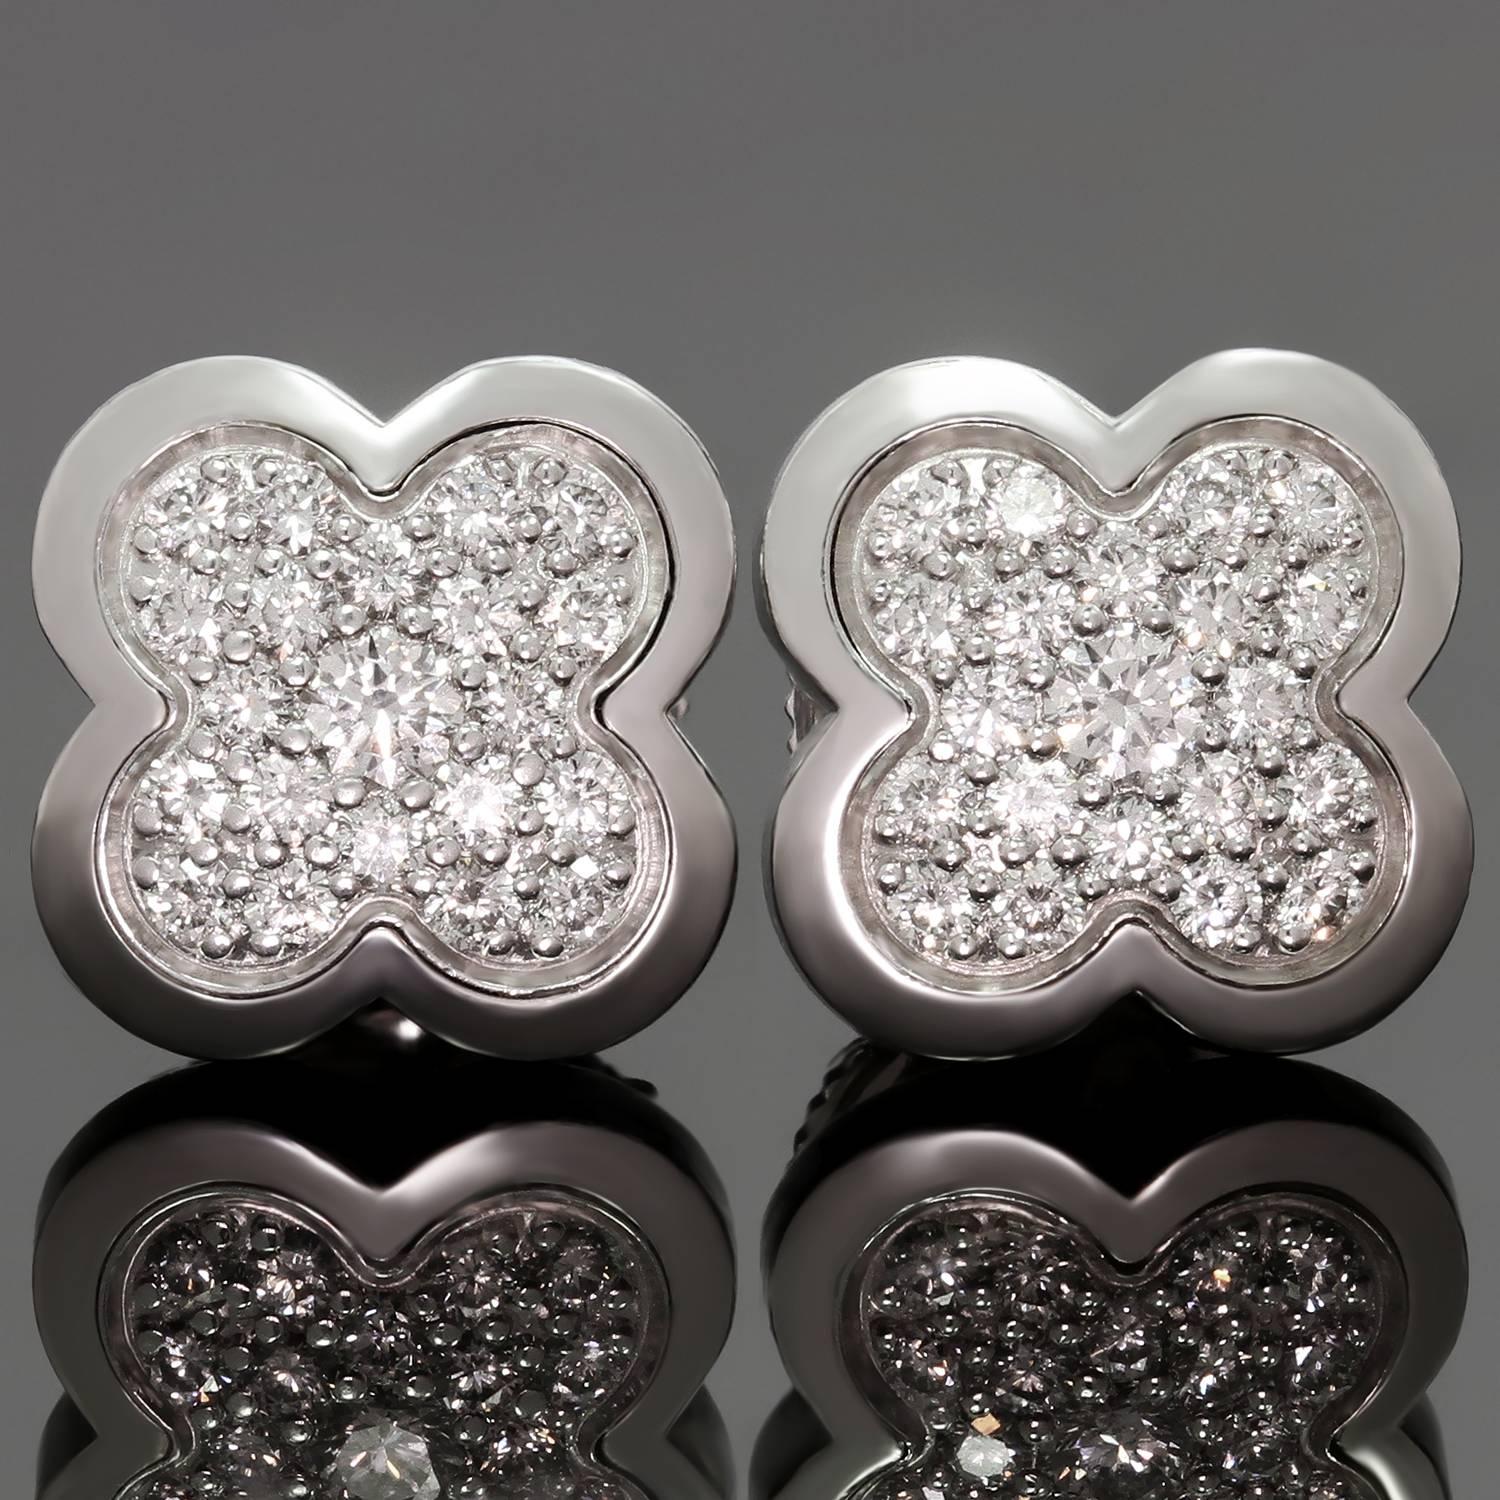 These gorgeous Van Cleef & Arpels stud earrings from the Pure Alhambra collection feature the lucky clover motif crafted in 18k white gold and set with brilliant-cut diamonds of an estimated 0.38 carats. Made in France circa 2005. Measurements: